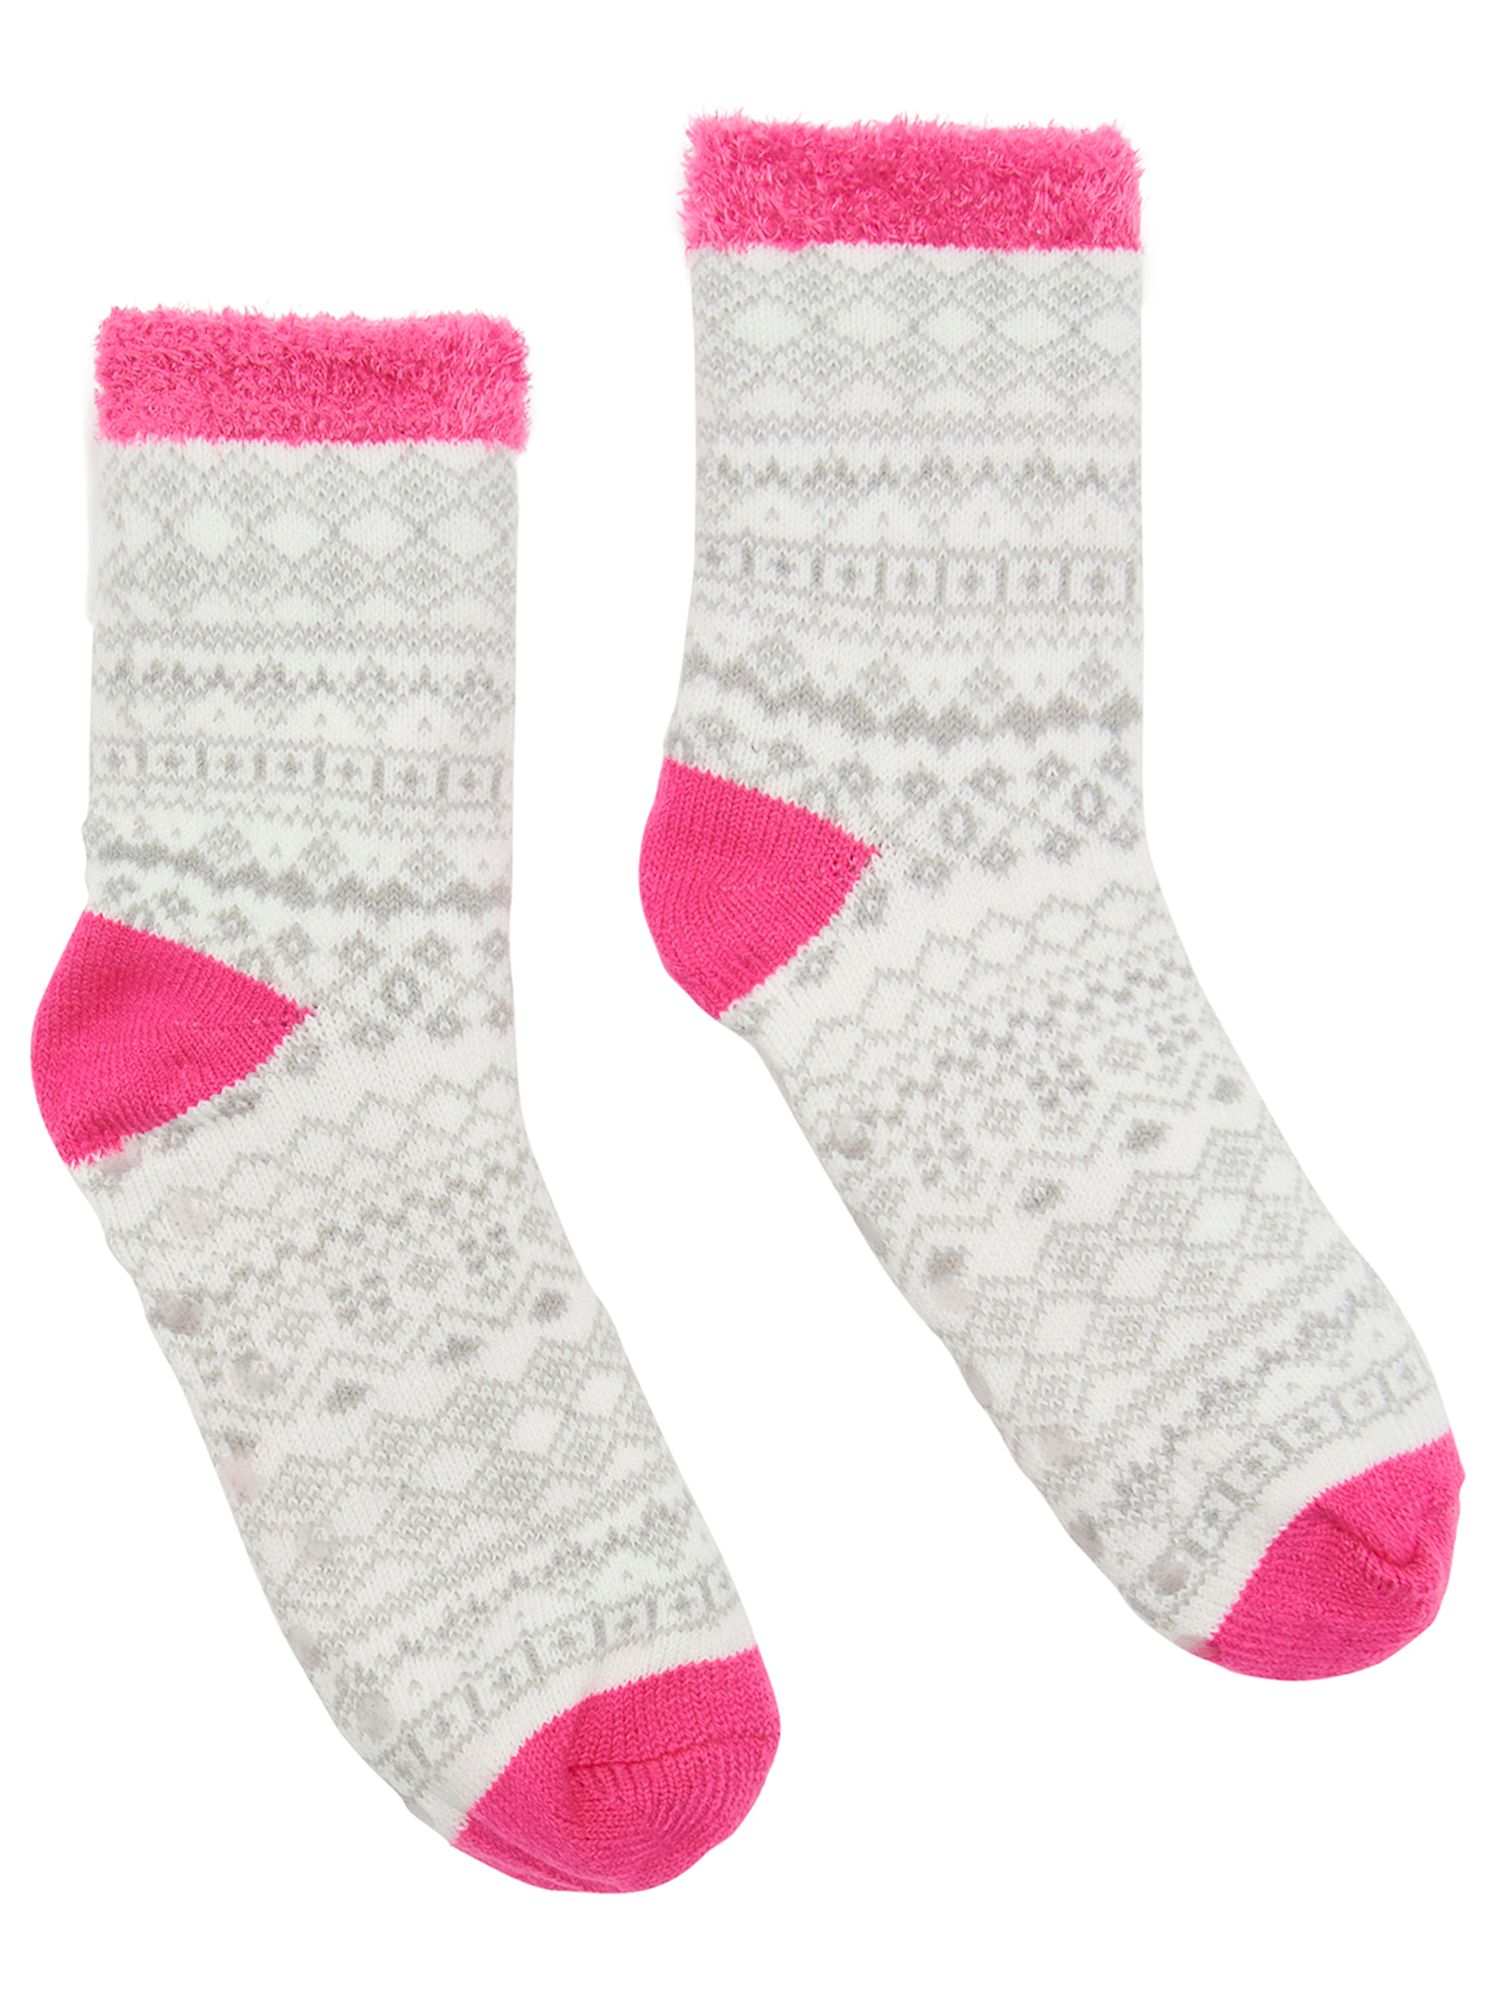 Joules Textured Three Tone Cabin Ankle Socks